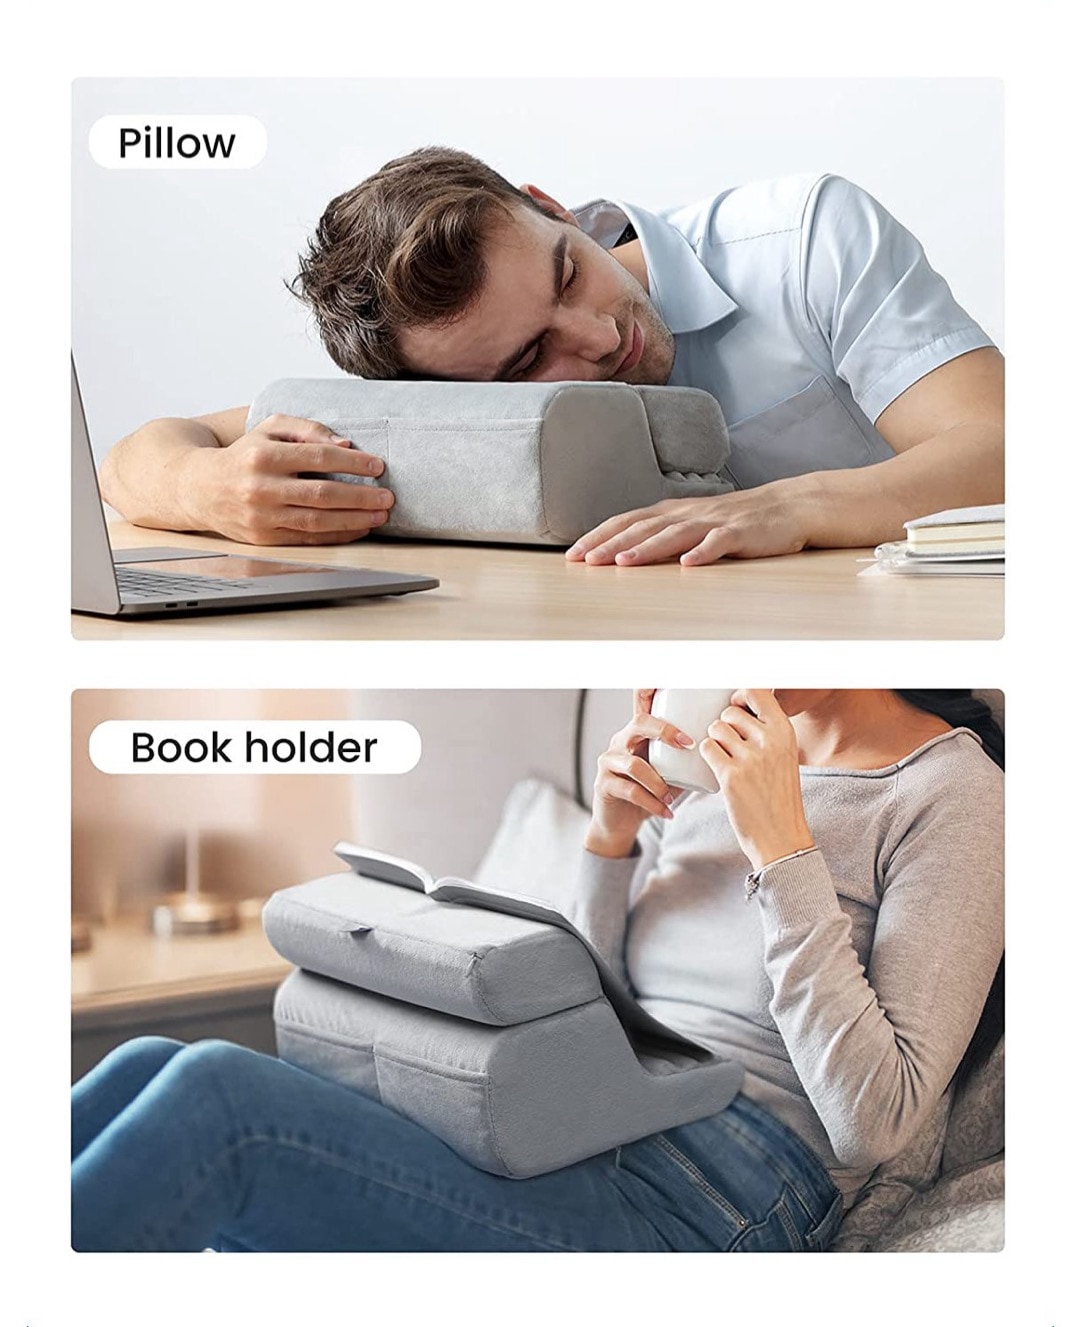 Tablet stand and book pillow in one - best gifts for book lovers